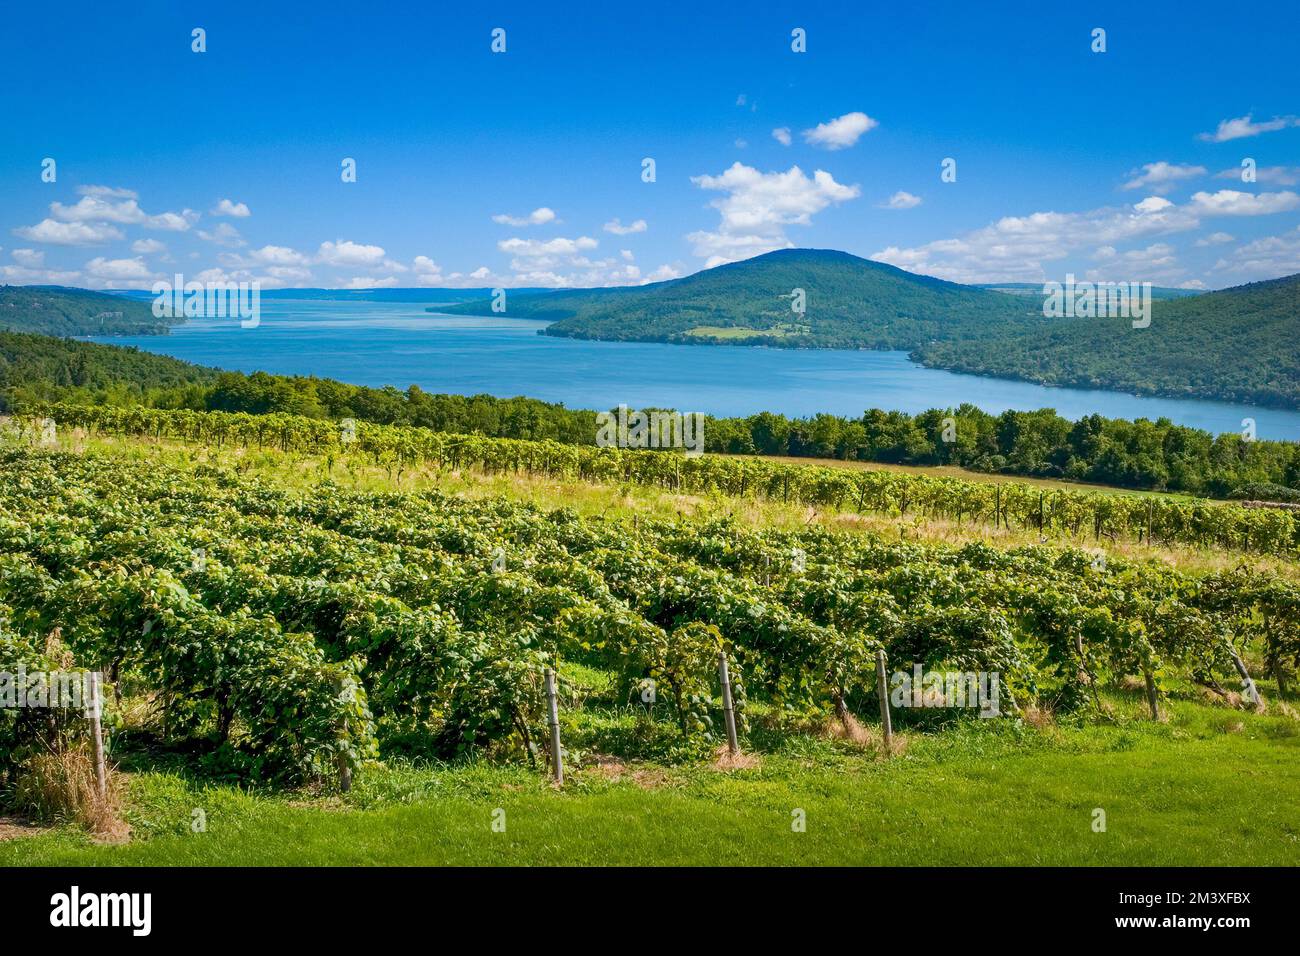 Canandaigua Lake in the Finger Lakes region of New Yrok State in the USA Stock Photo